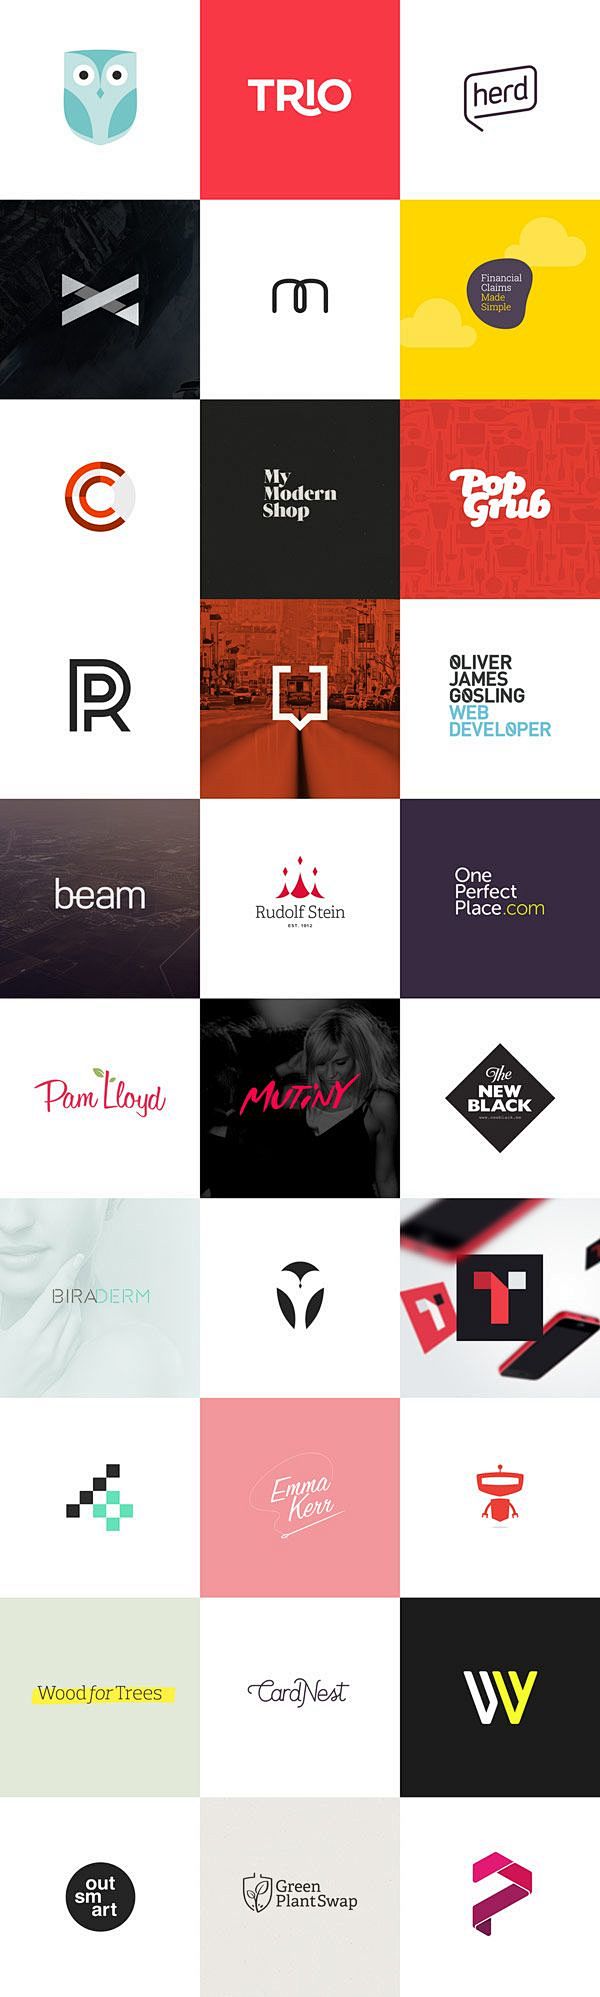 30 Logos by Hype & S...